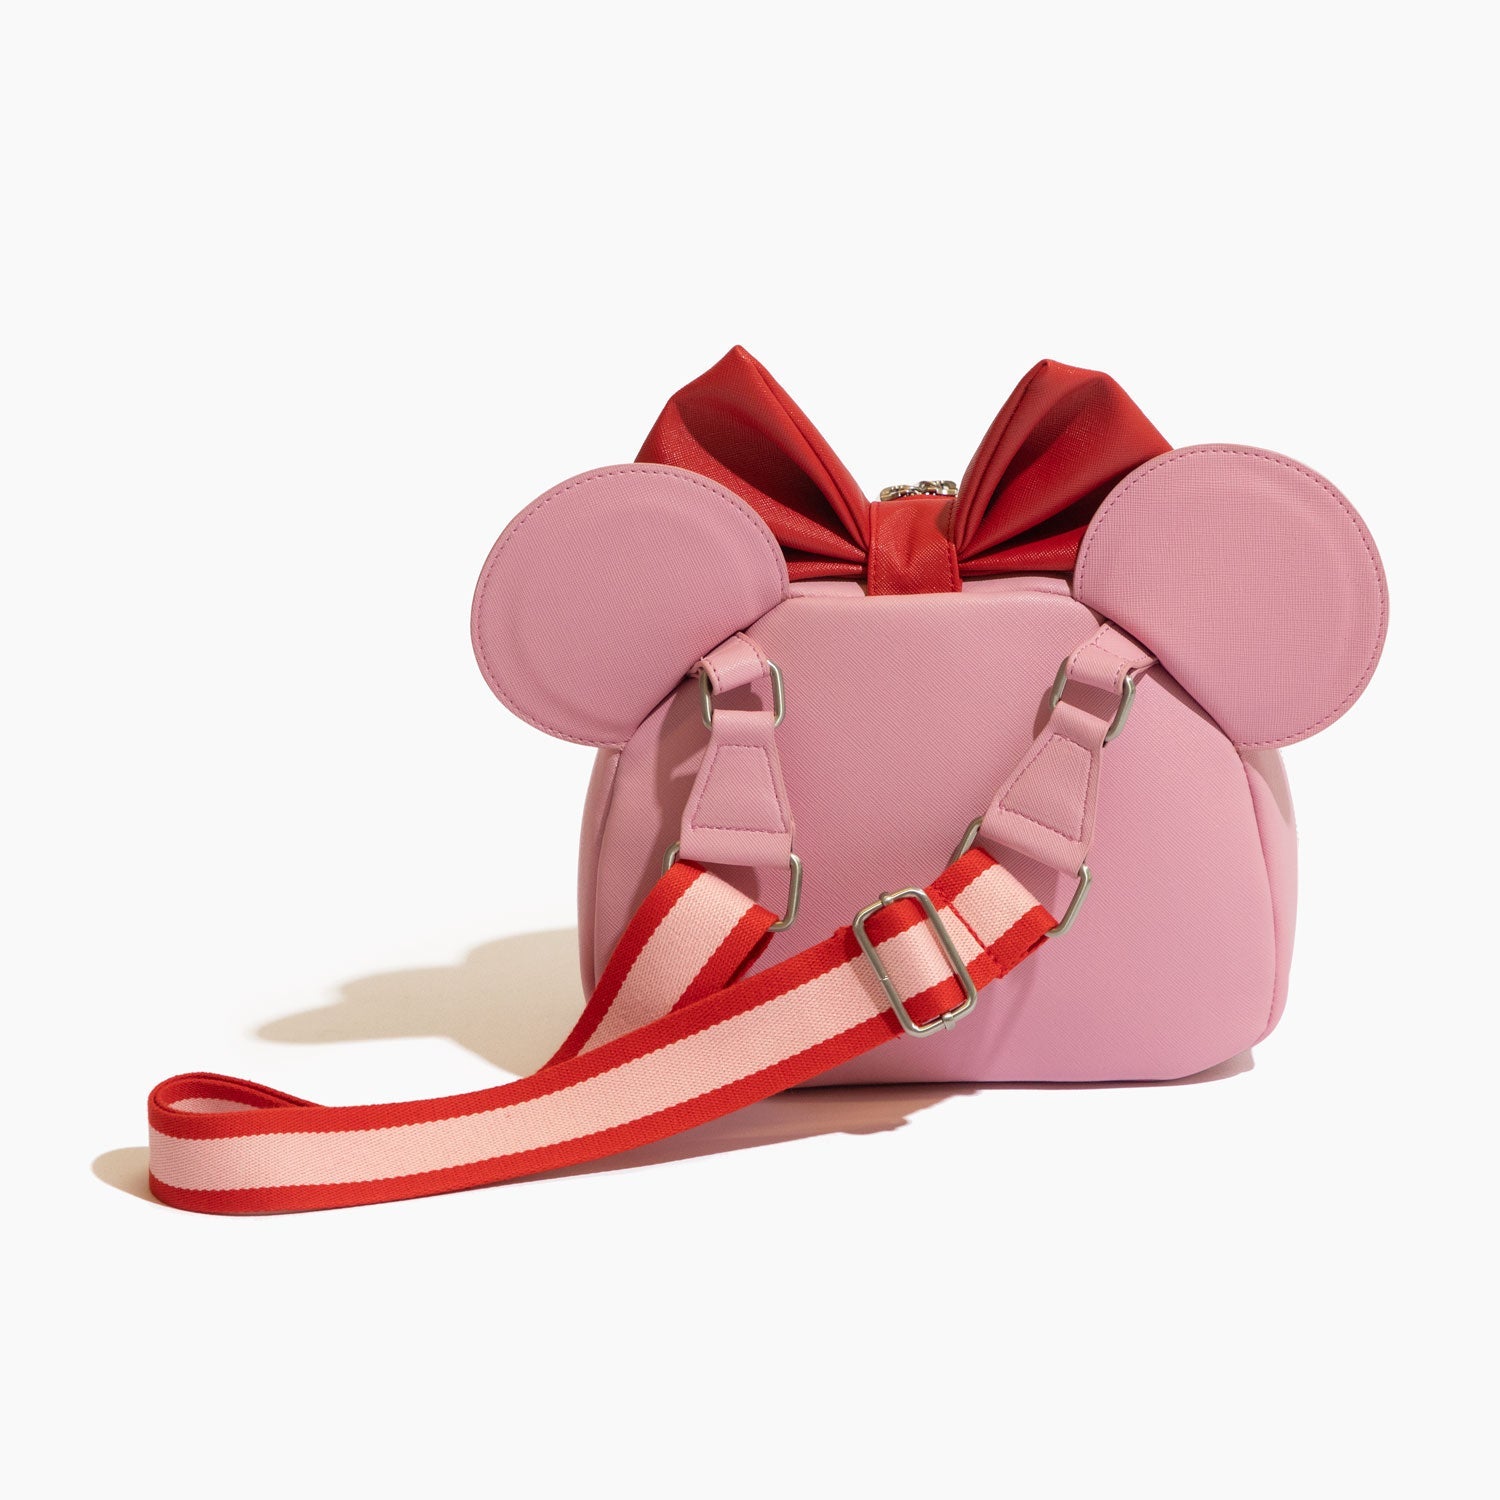 Buy Disney's Minnie Mouse Crossbody Purse Online at Lowest Price Ever in  India | Check Reviews & Ratings - Shop The World